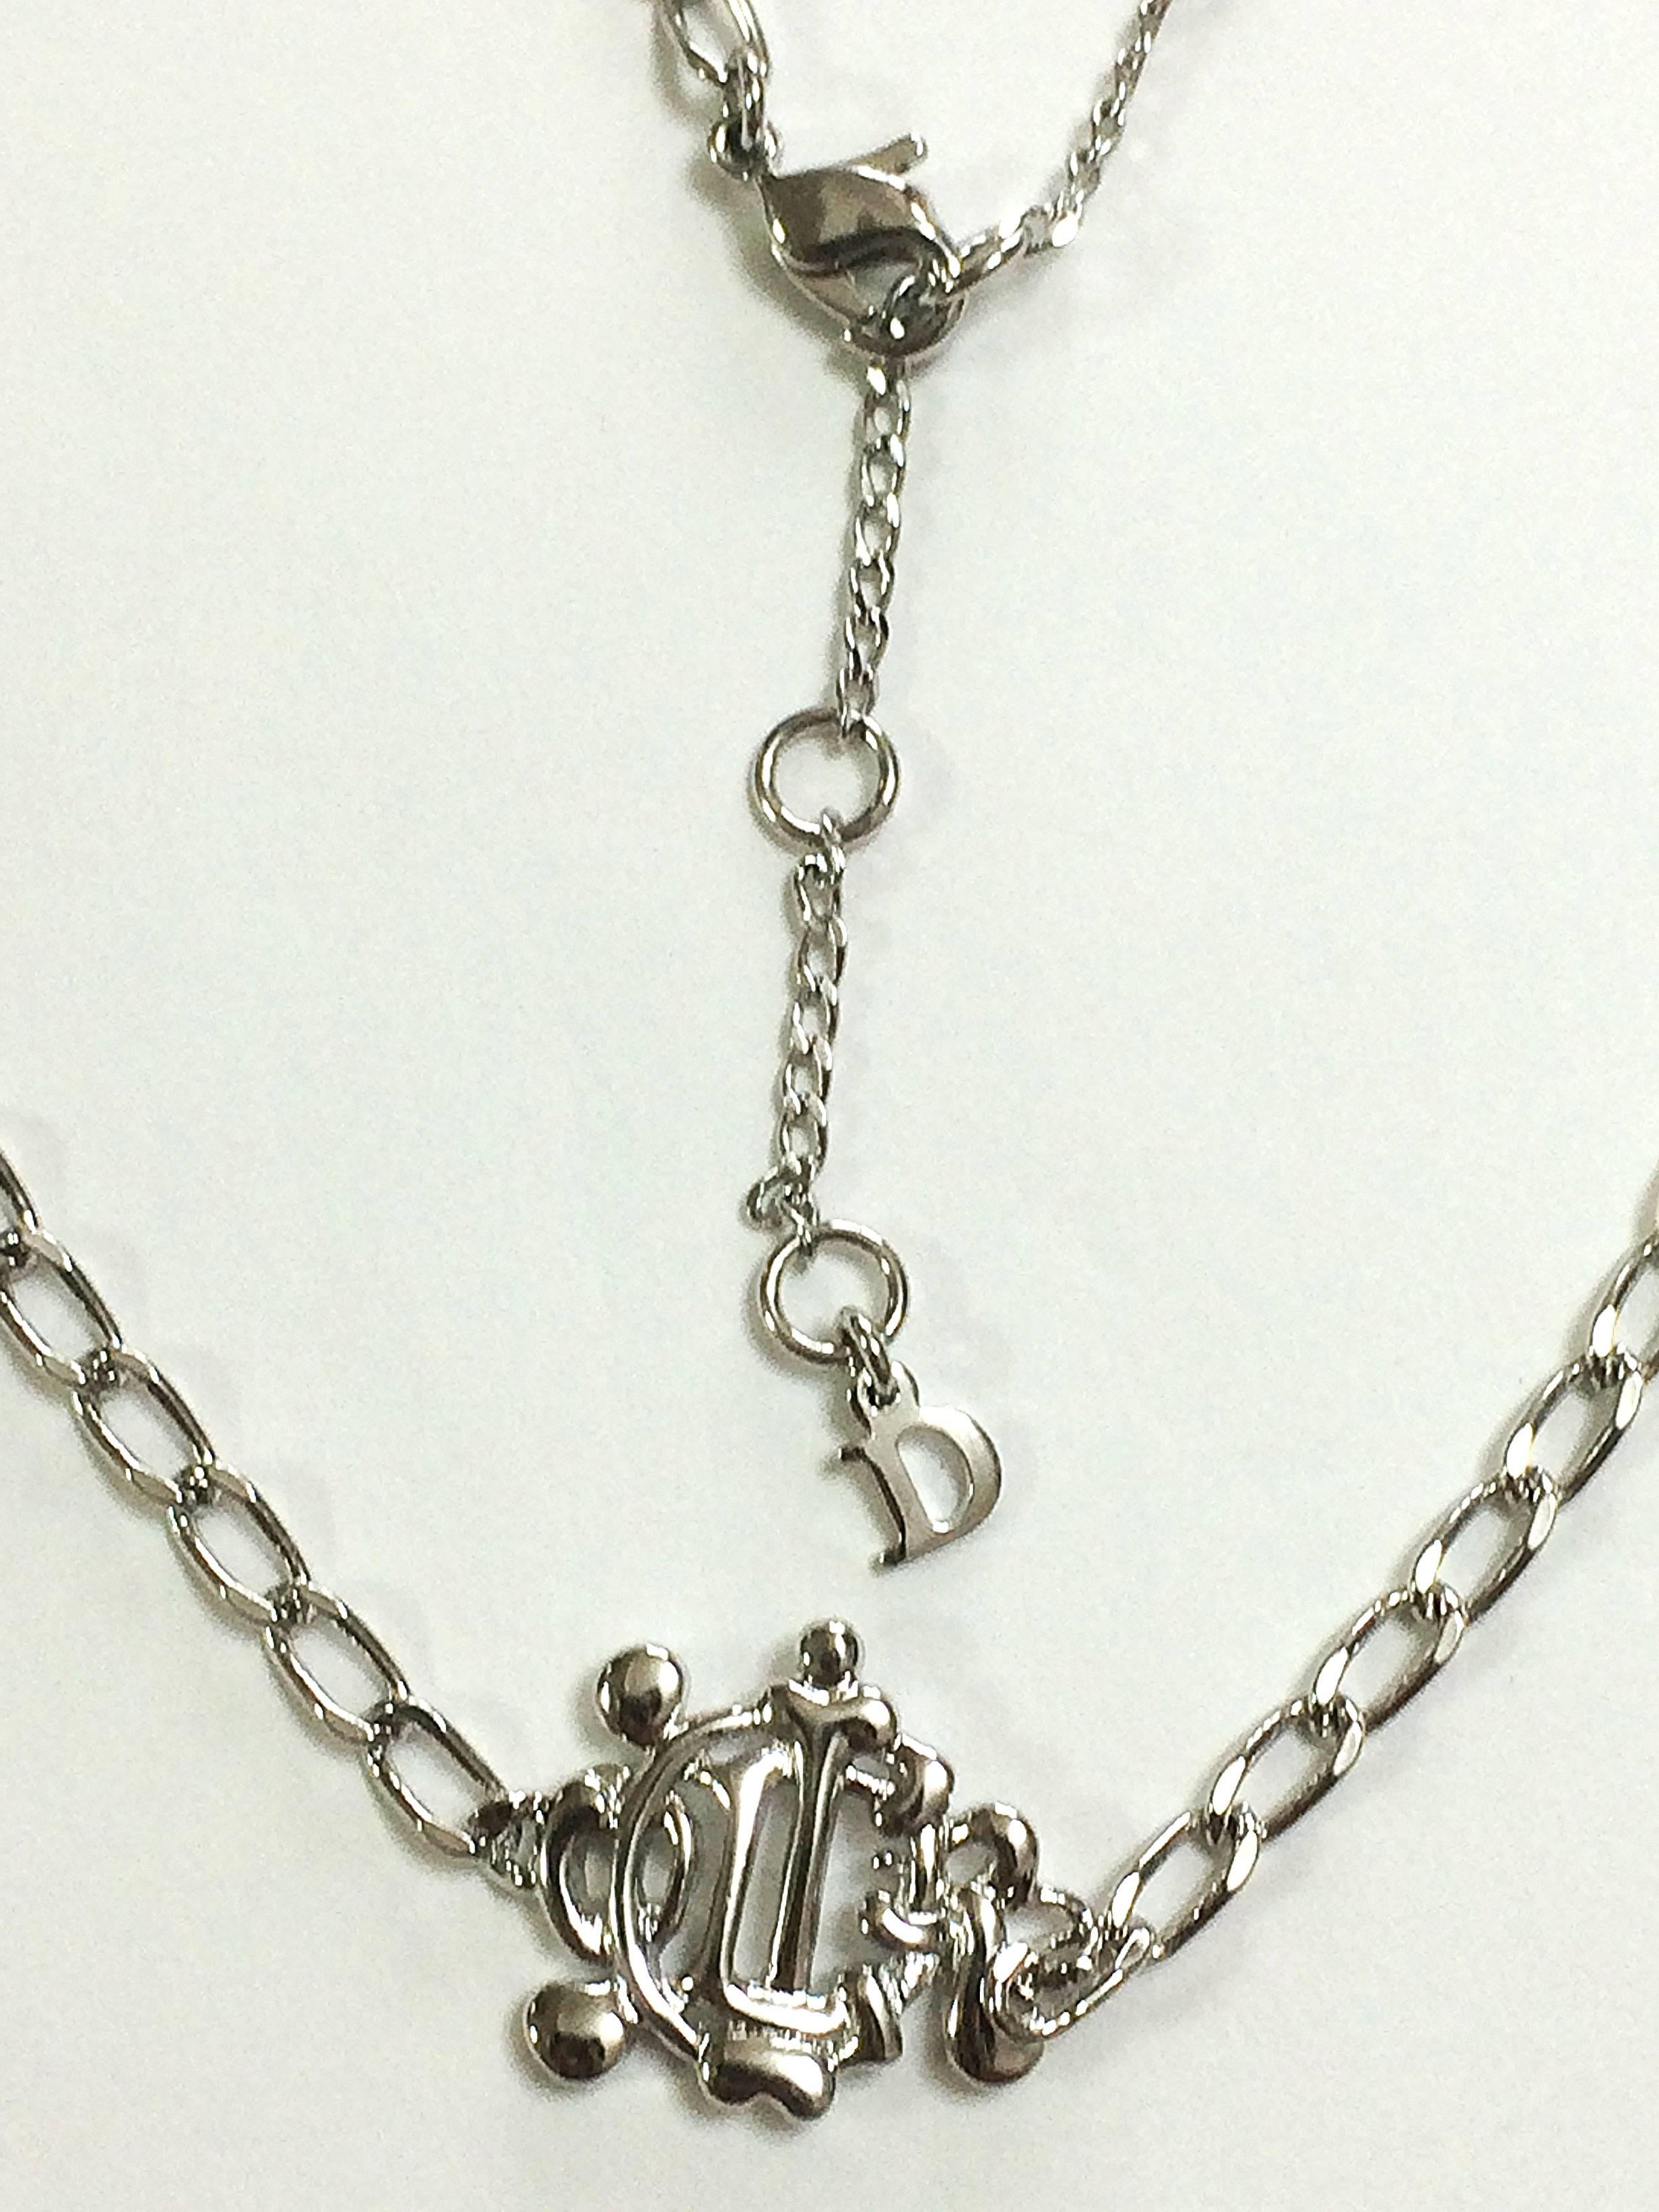 Women's MINT. Vintage Christian Dior silver tone chain necklace with logo motif top. For Sale